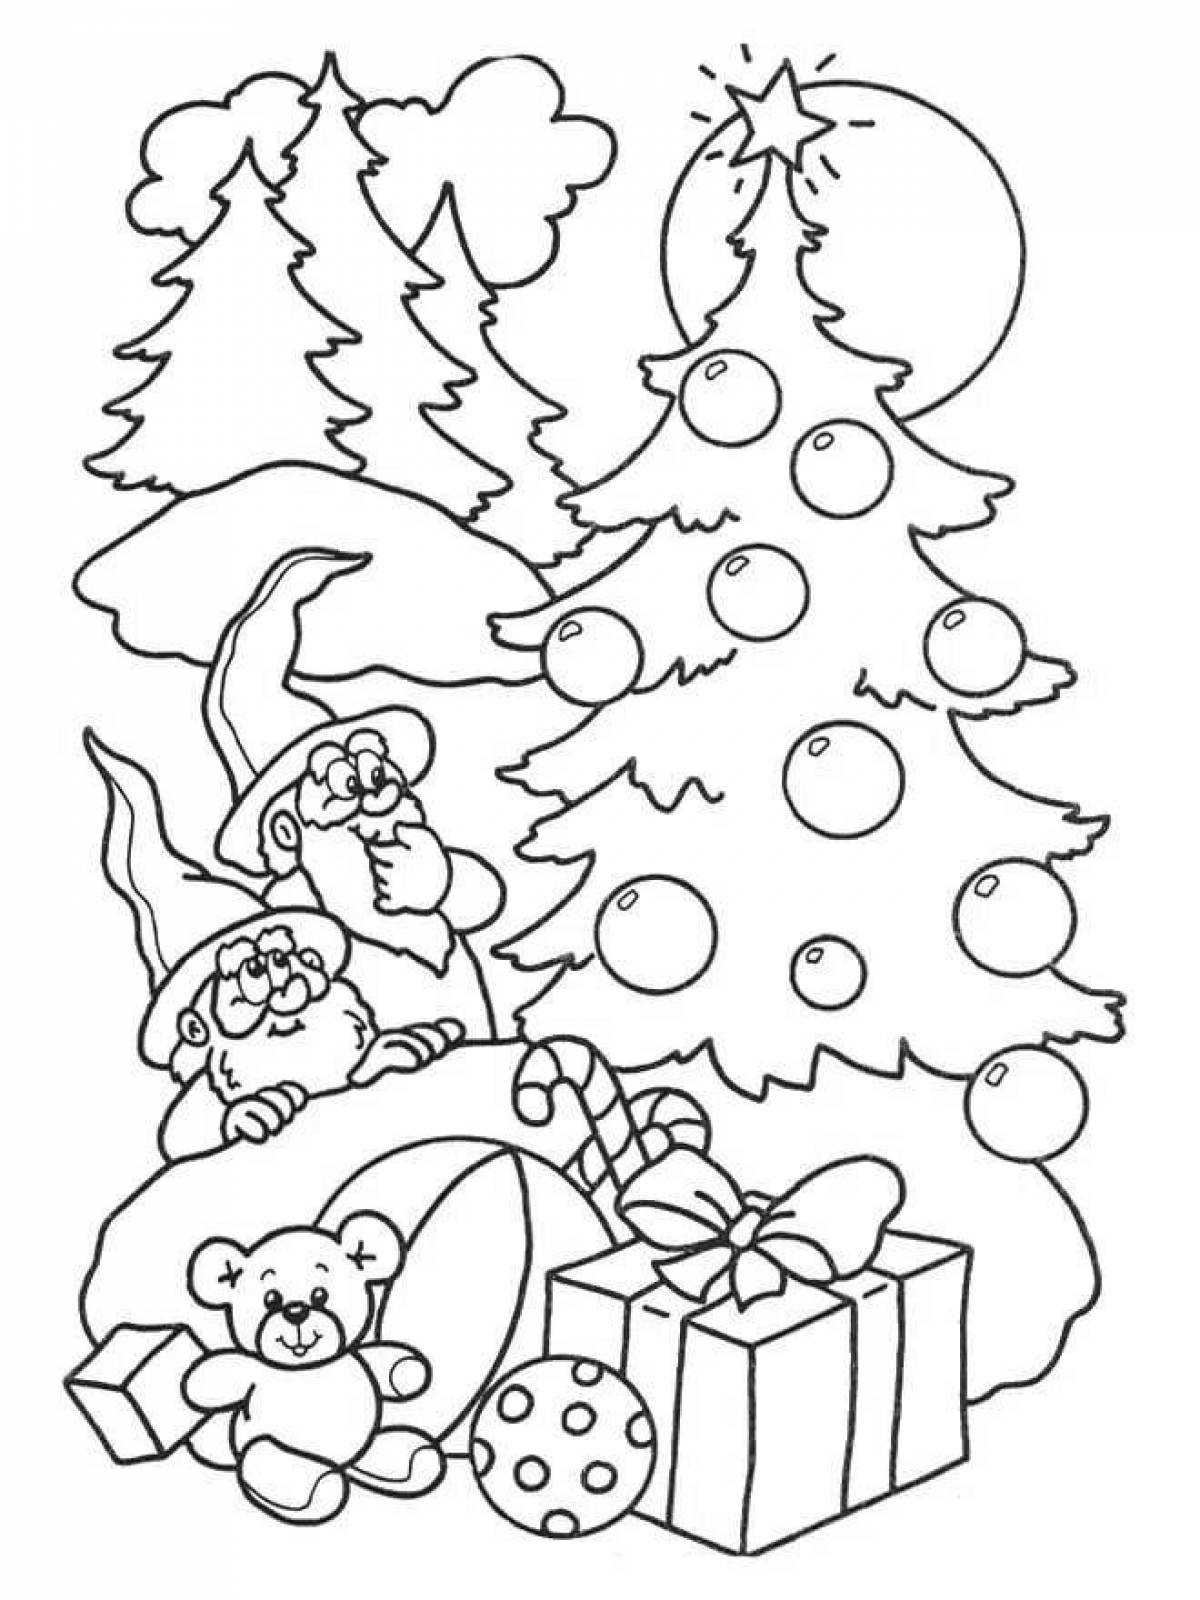 Creative Christmas coloring book for kids 6-7 years old